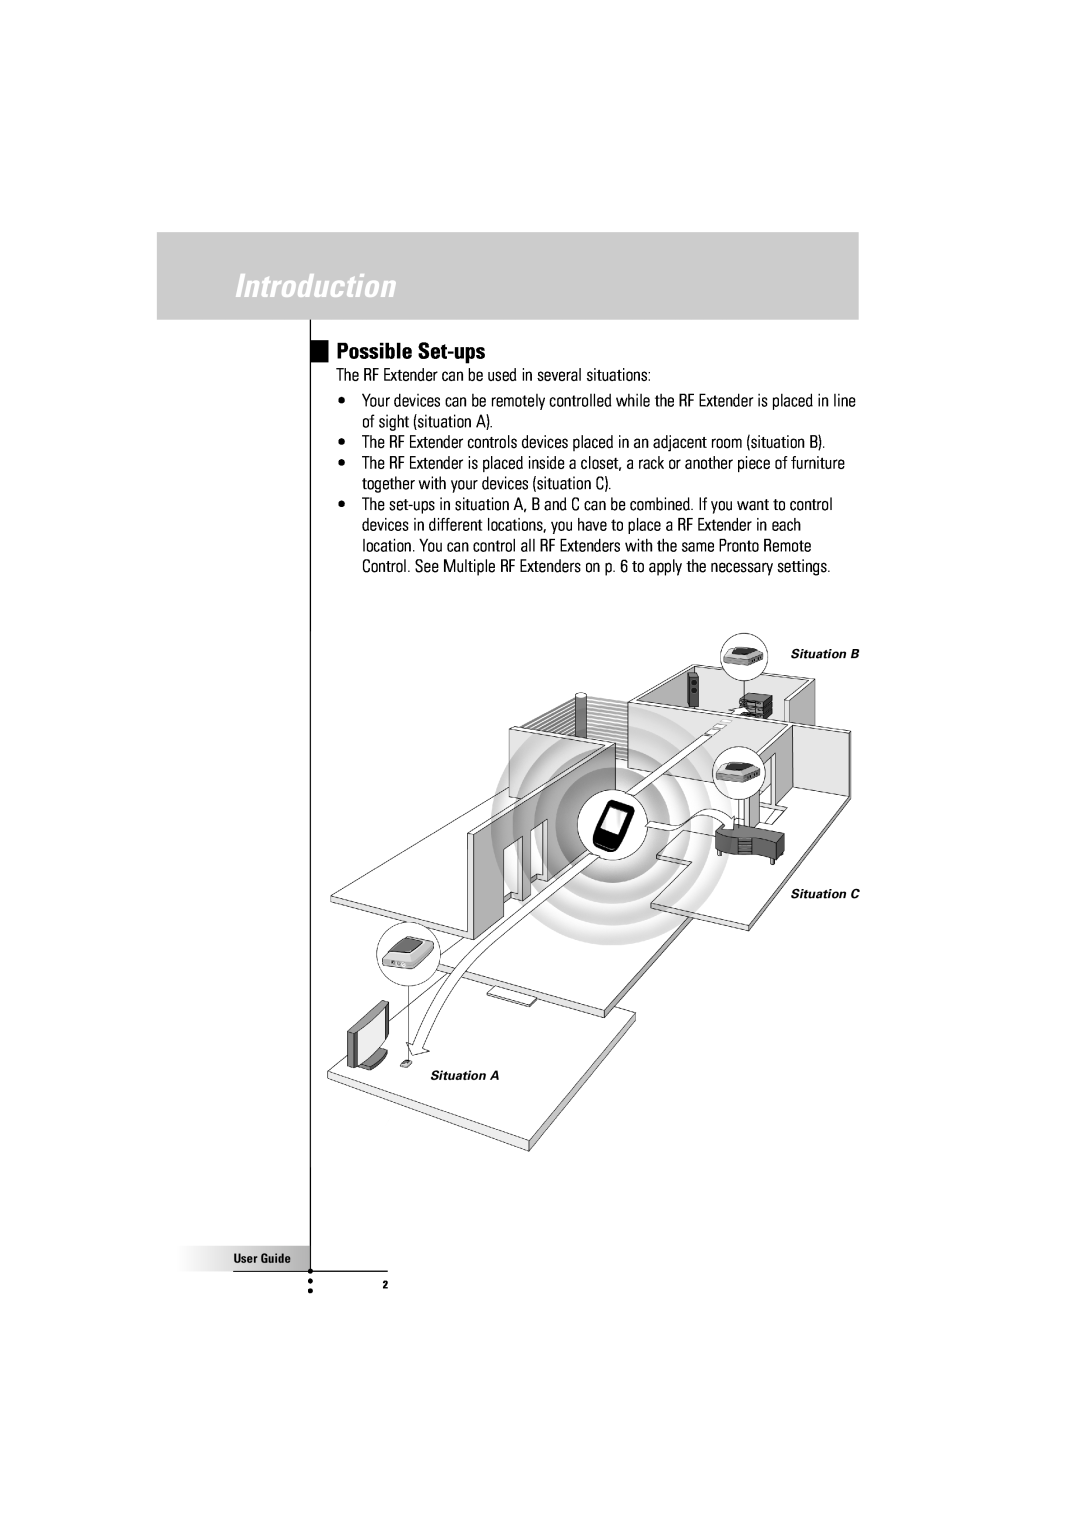 Philips RFX600099 manual Possible Set-ups, Introduction 